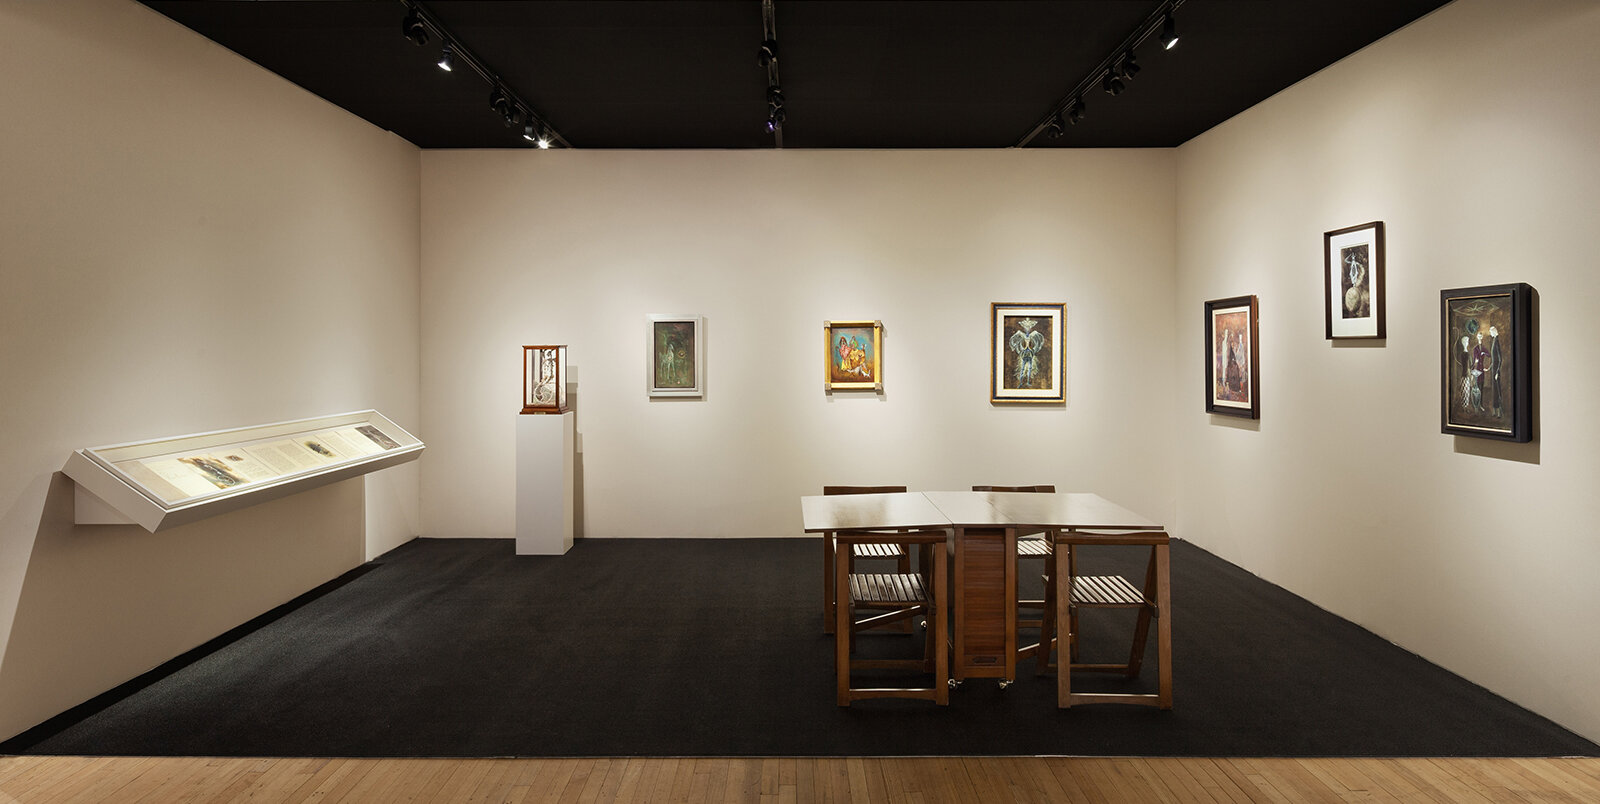  Image: ADAA, The Art Show 2020, installation view, Gallery Wendi Norris, Booth D29, The Park Avenue Armory, 651 W 168th St, New York, NY, February 27 - March 1, 2020. Photo: Olympia Shannon. 